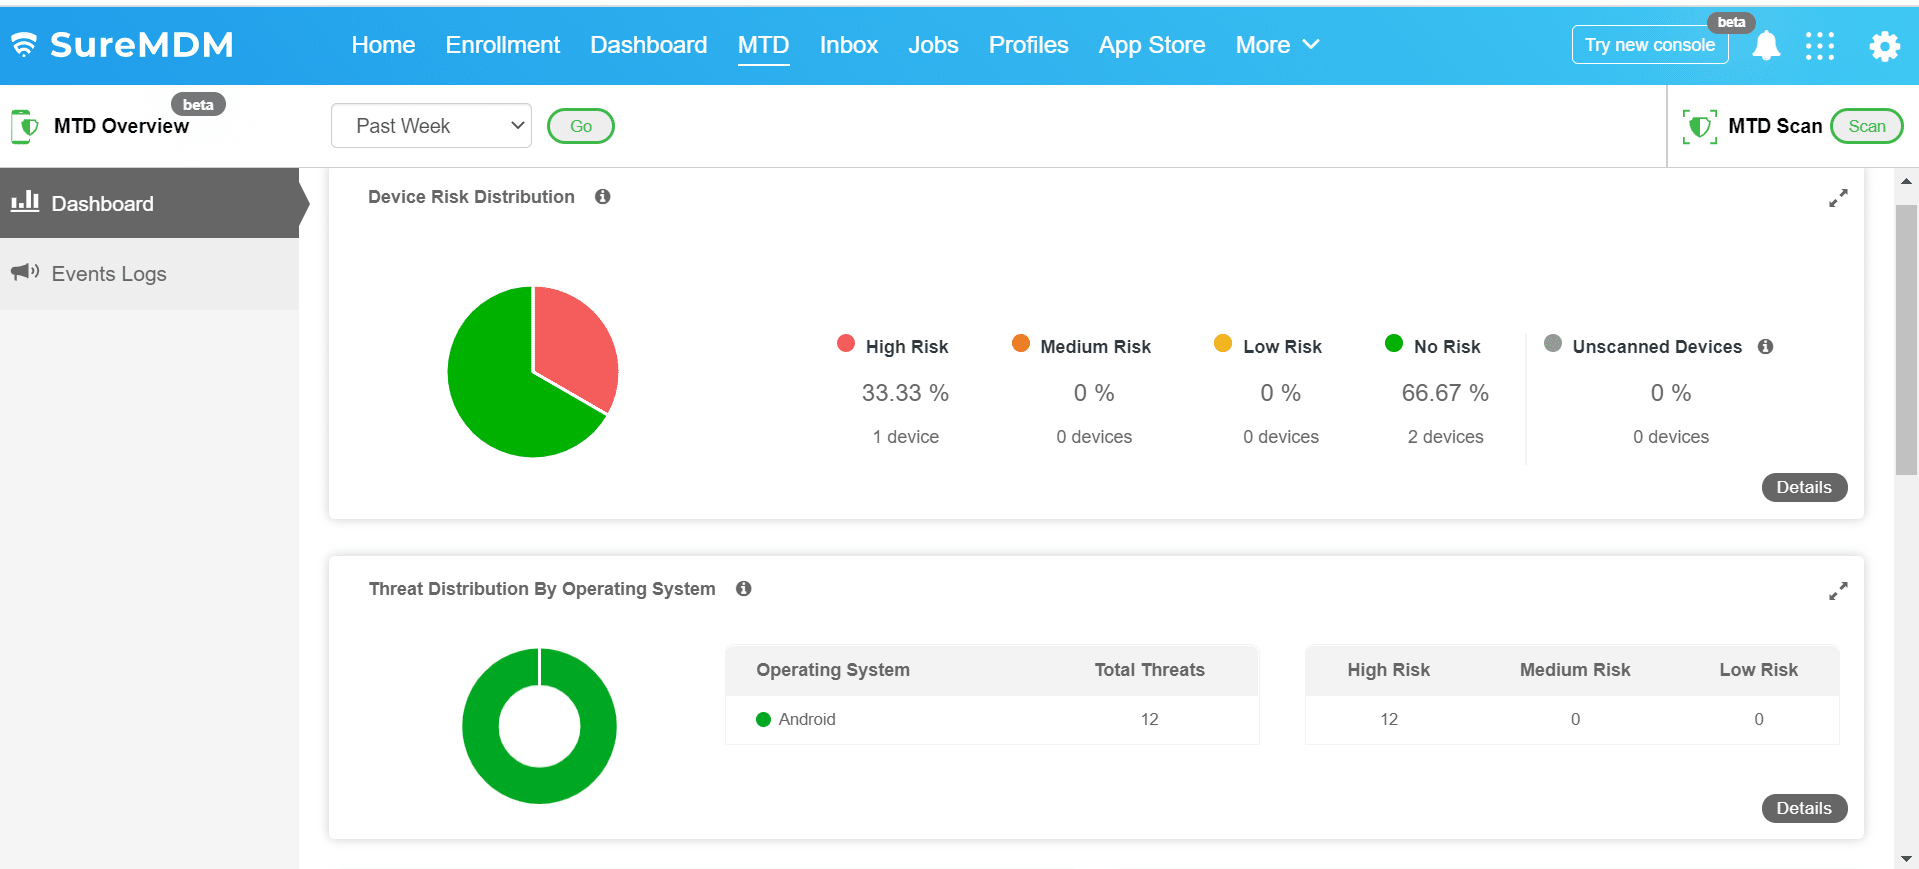 42Gears MTD Dashboard showing Device Risk Distribution and Threat Distribution by OS across all devices